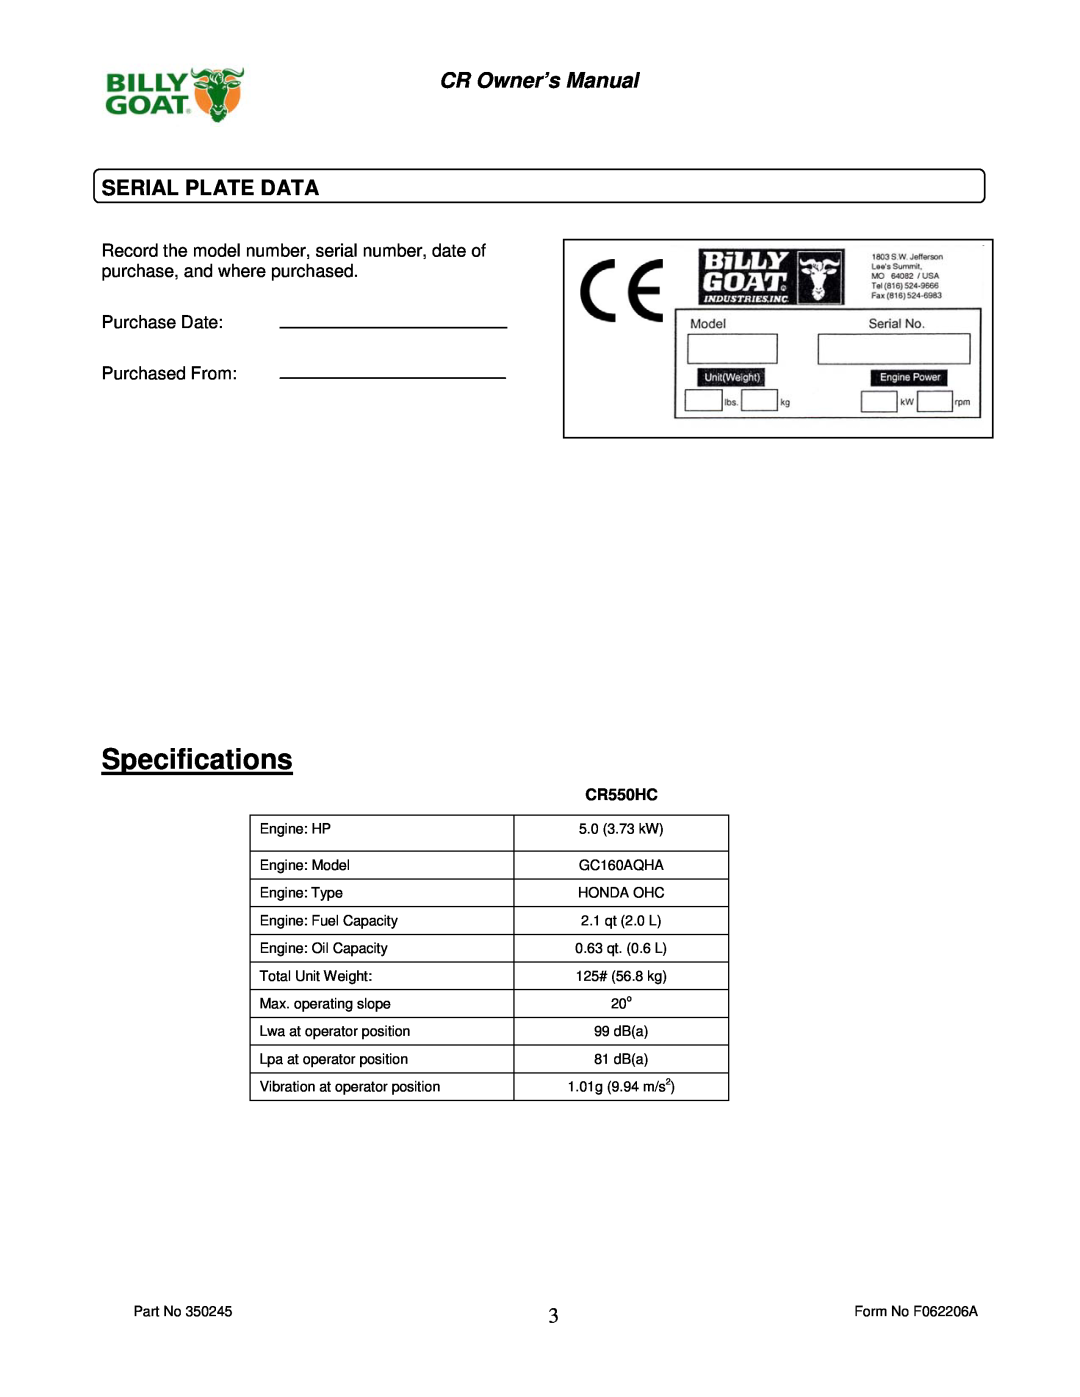 Billy Goat CR550HC owner manual Serial Plate Data, Specifications 